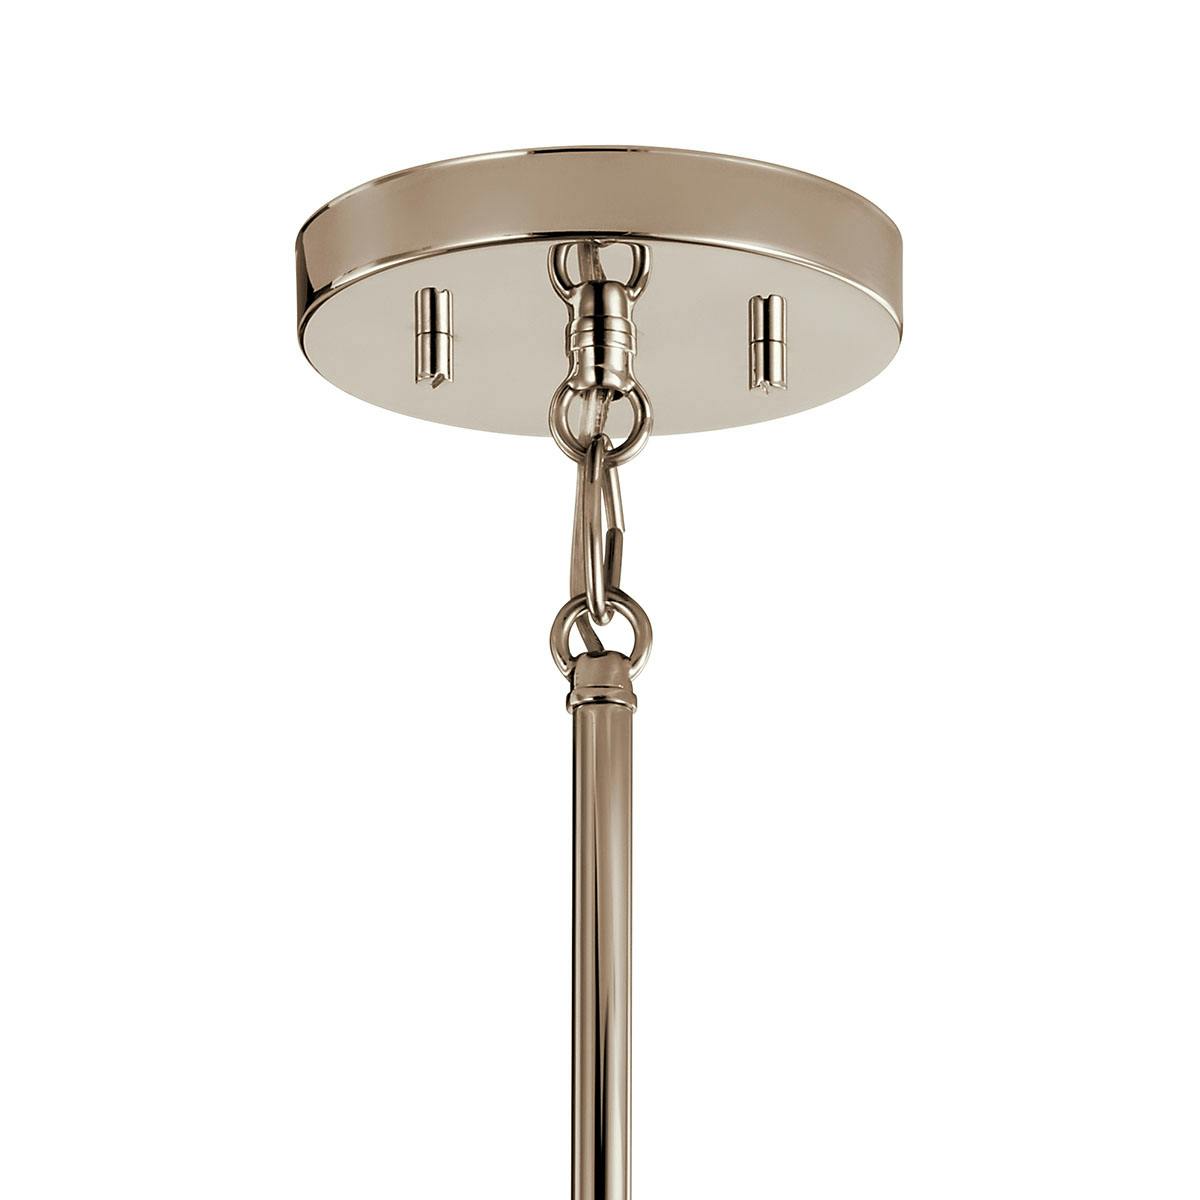 Canopy for the Ciona 4" 1 Light Mini Pendant Nickel on a white background